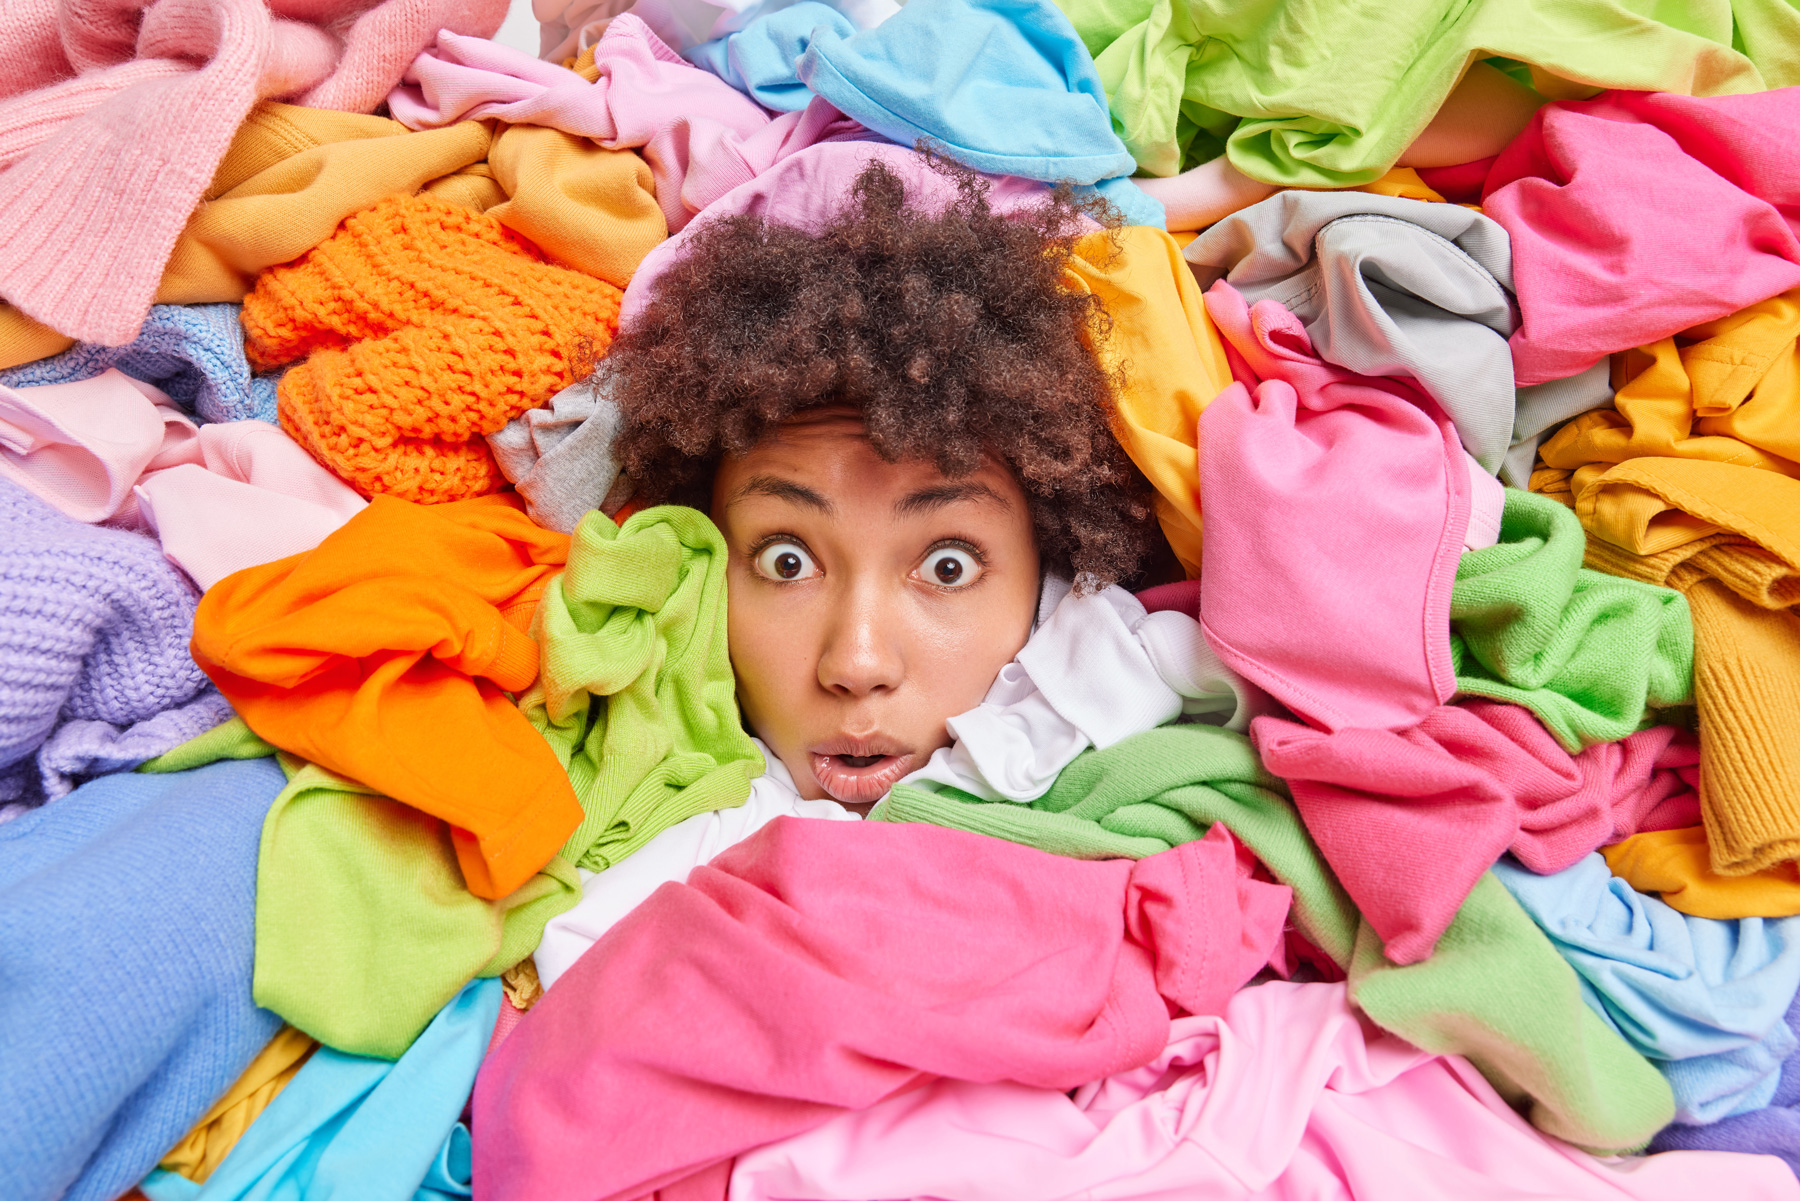 Why Does Clutter Cause Stress?